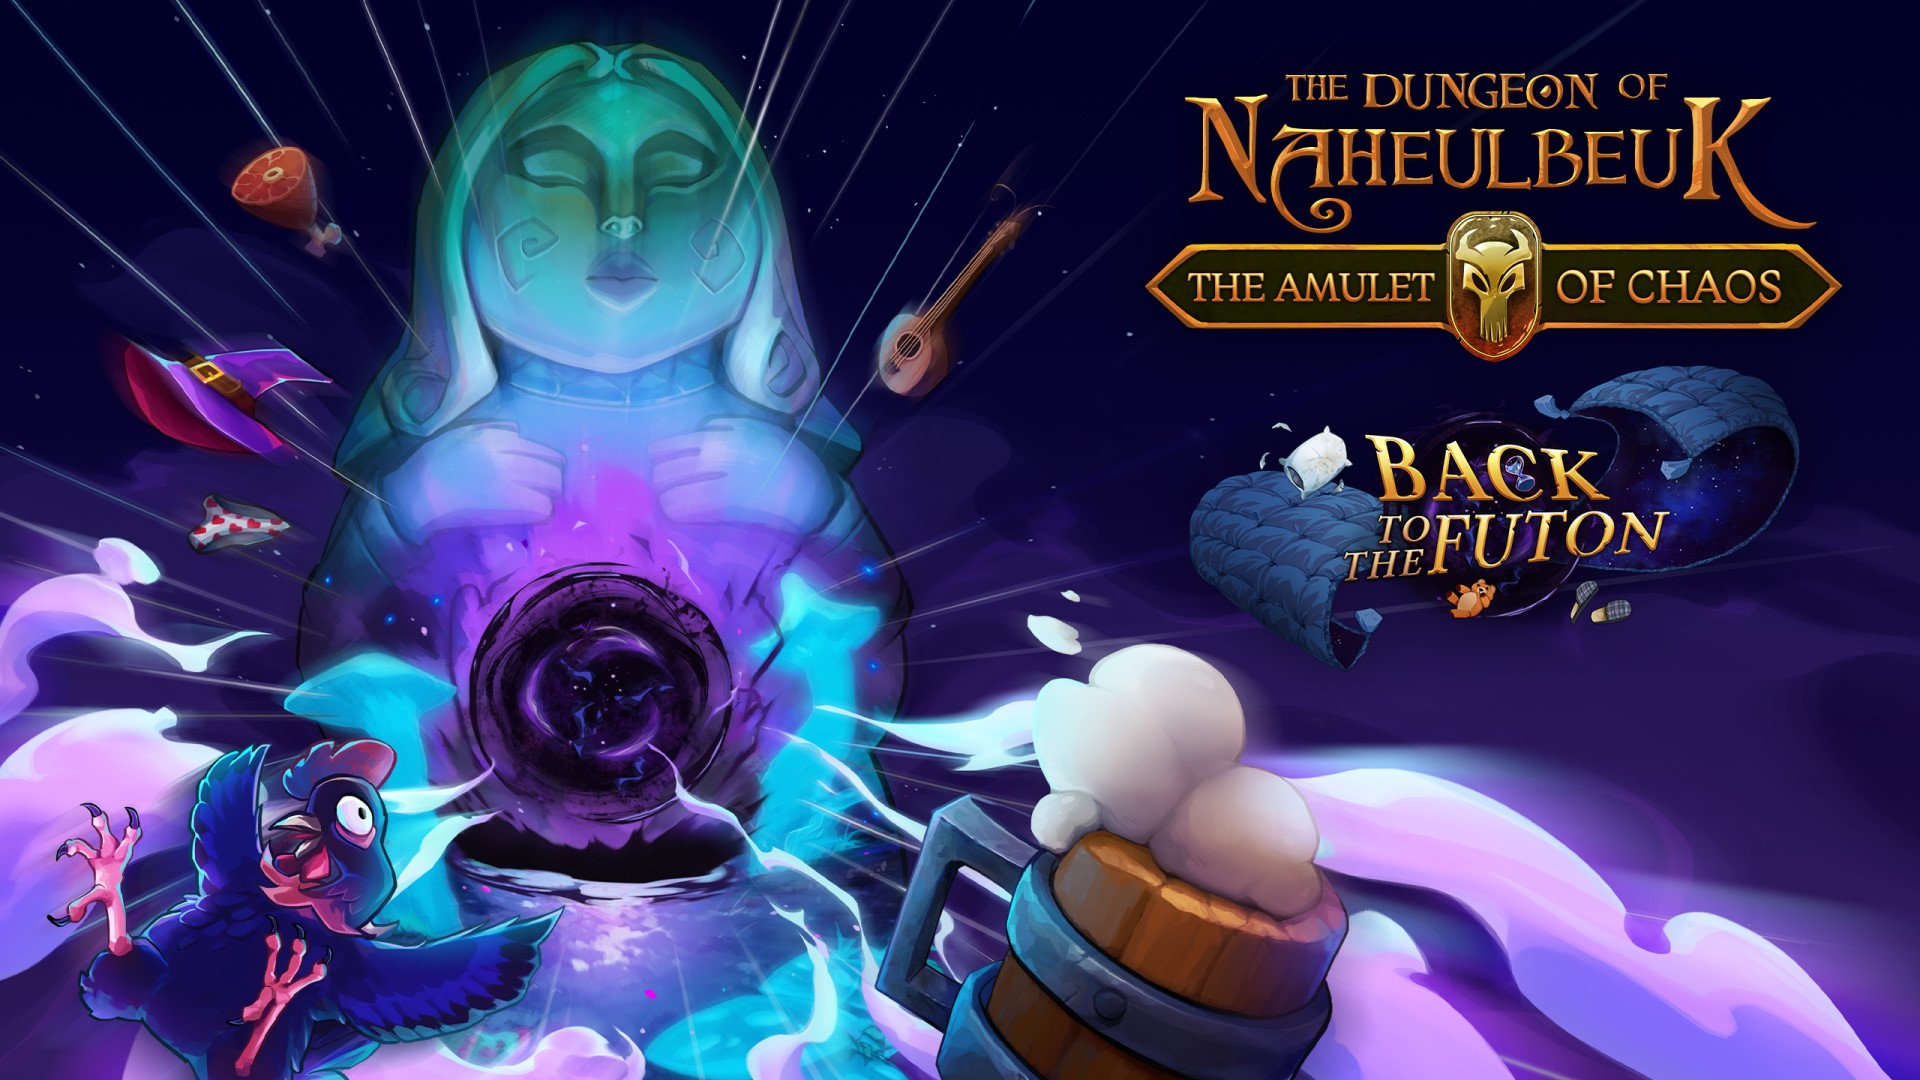 The Dungeon of Naheulbeuk: The Amulet of Chaos - Back to the futon